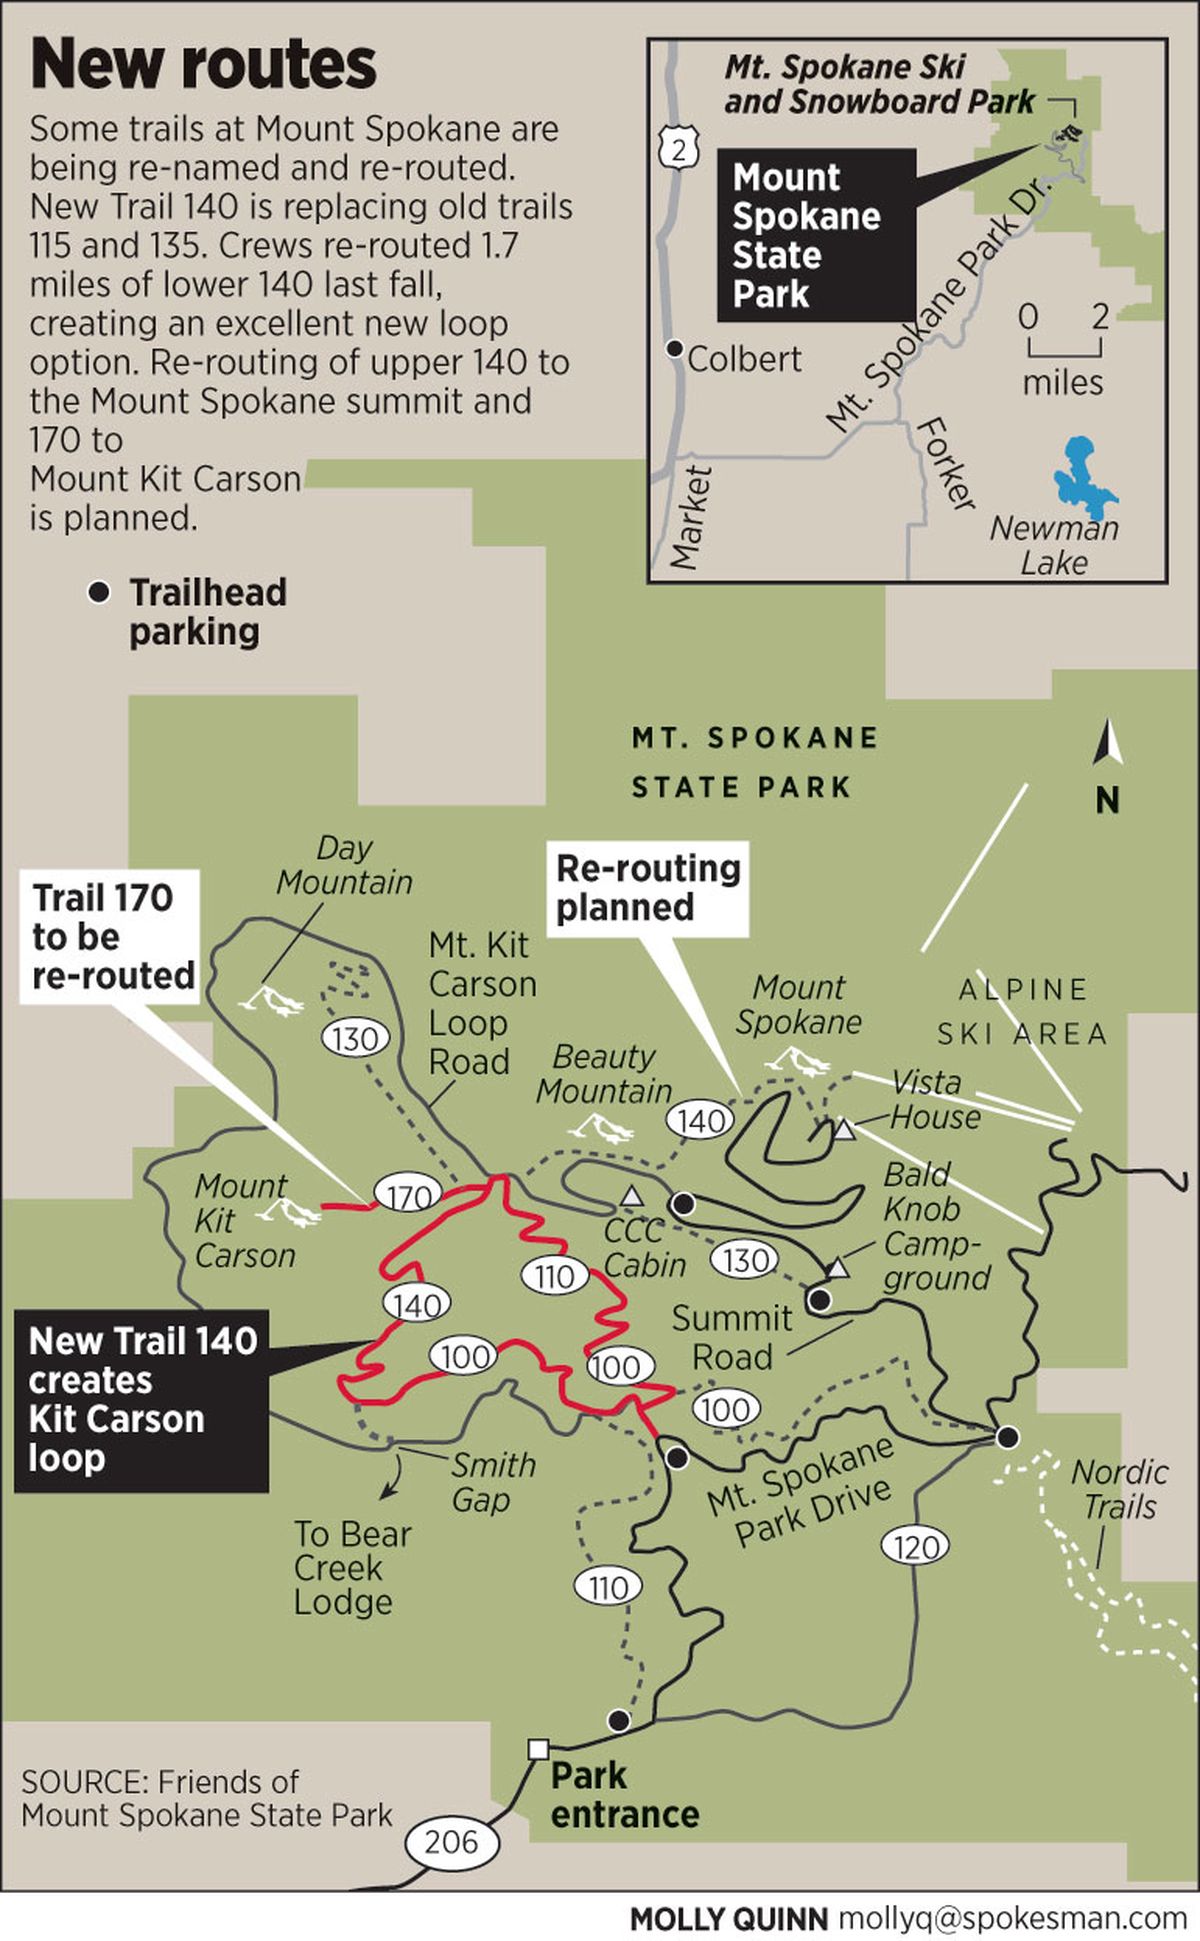 Trails at Mount Spokane State Park are being gradually rerouted since the park